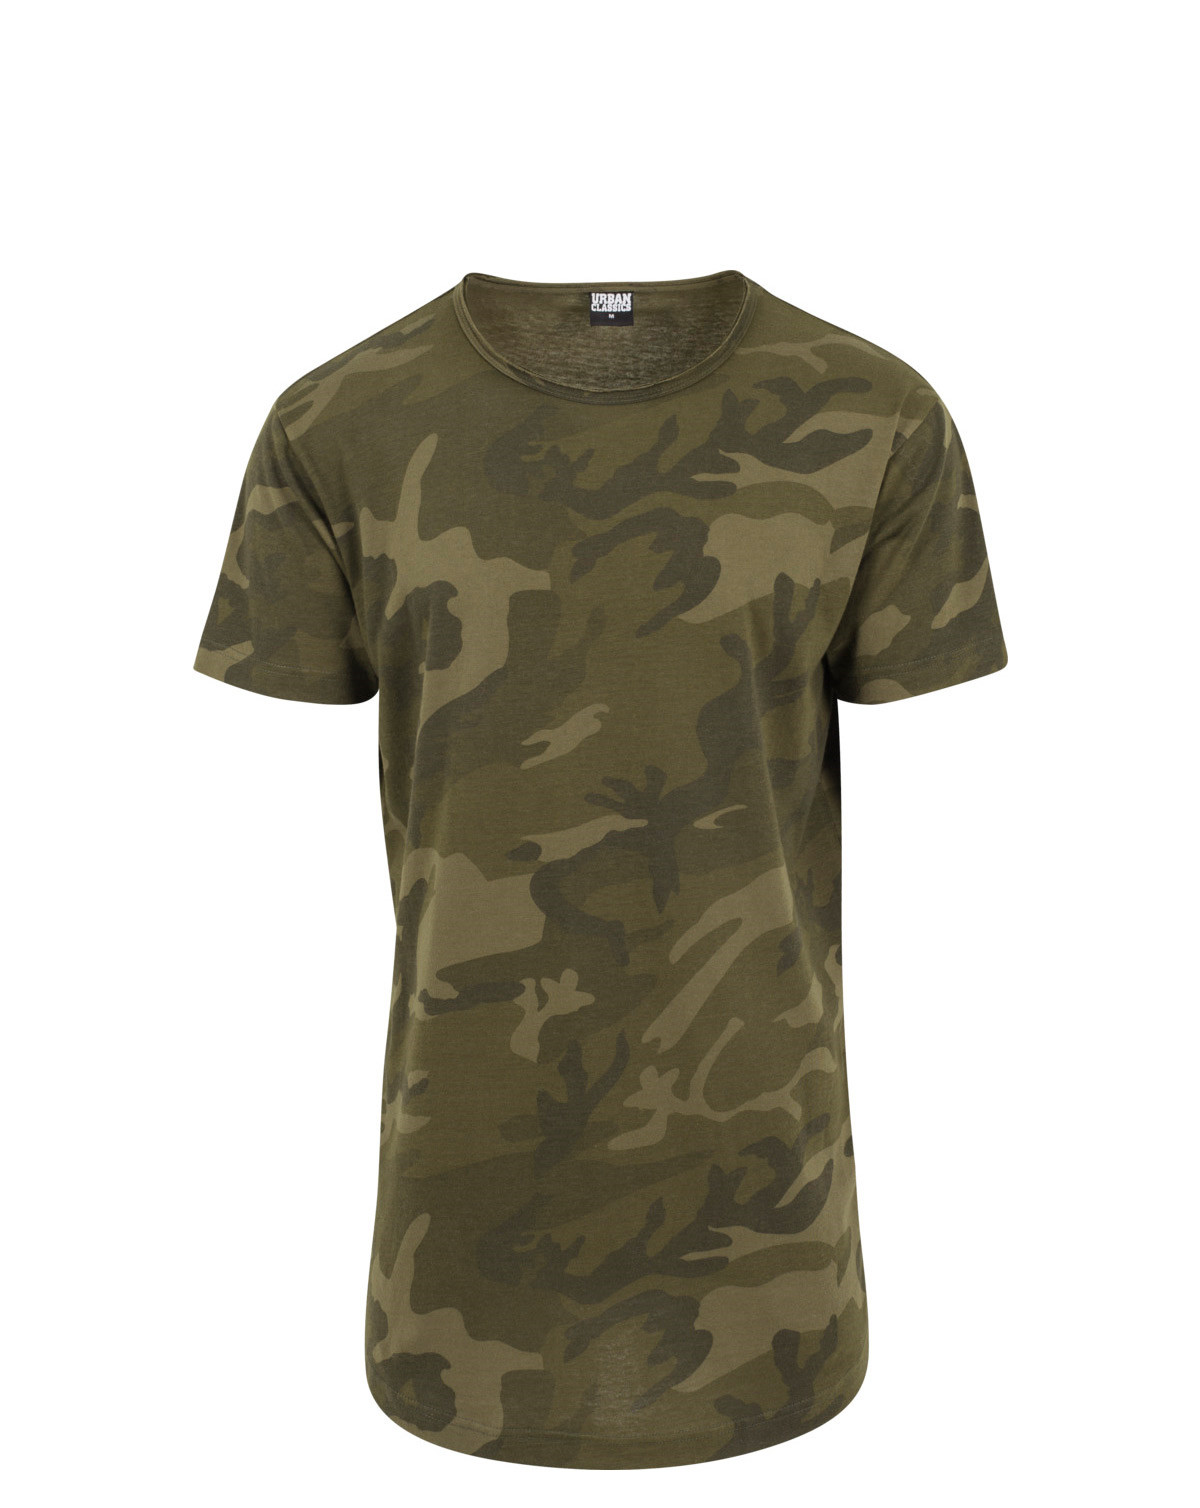 Urban Classics Lang Camouflage T-shirt (Oliven Camo, M)